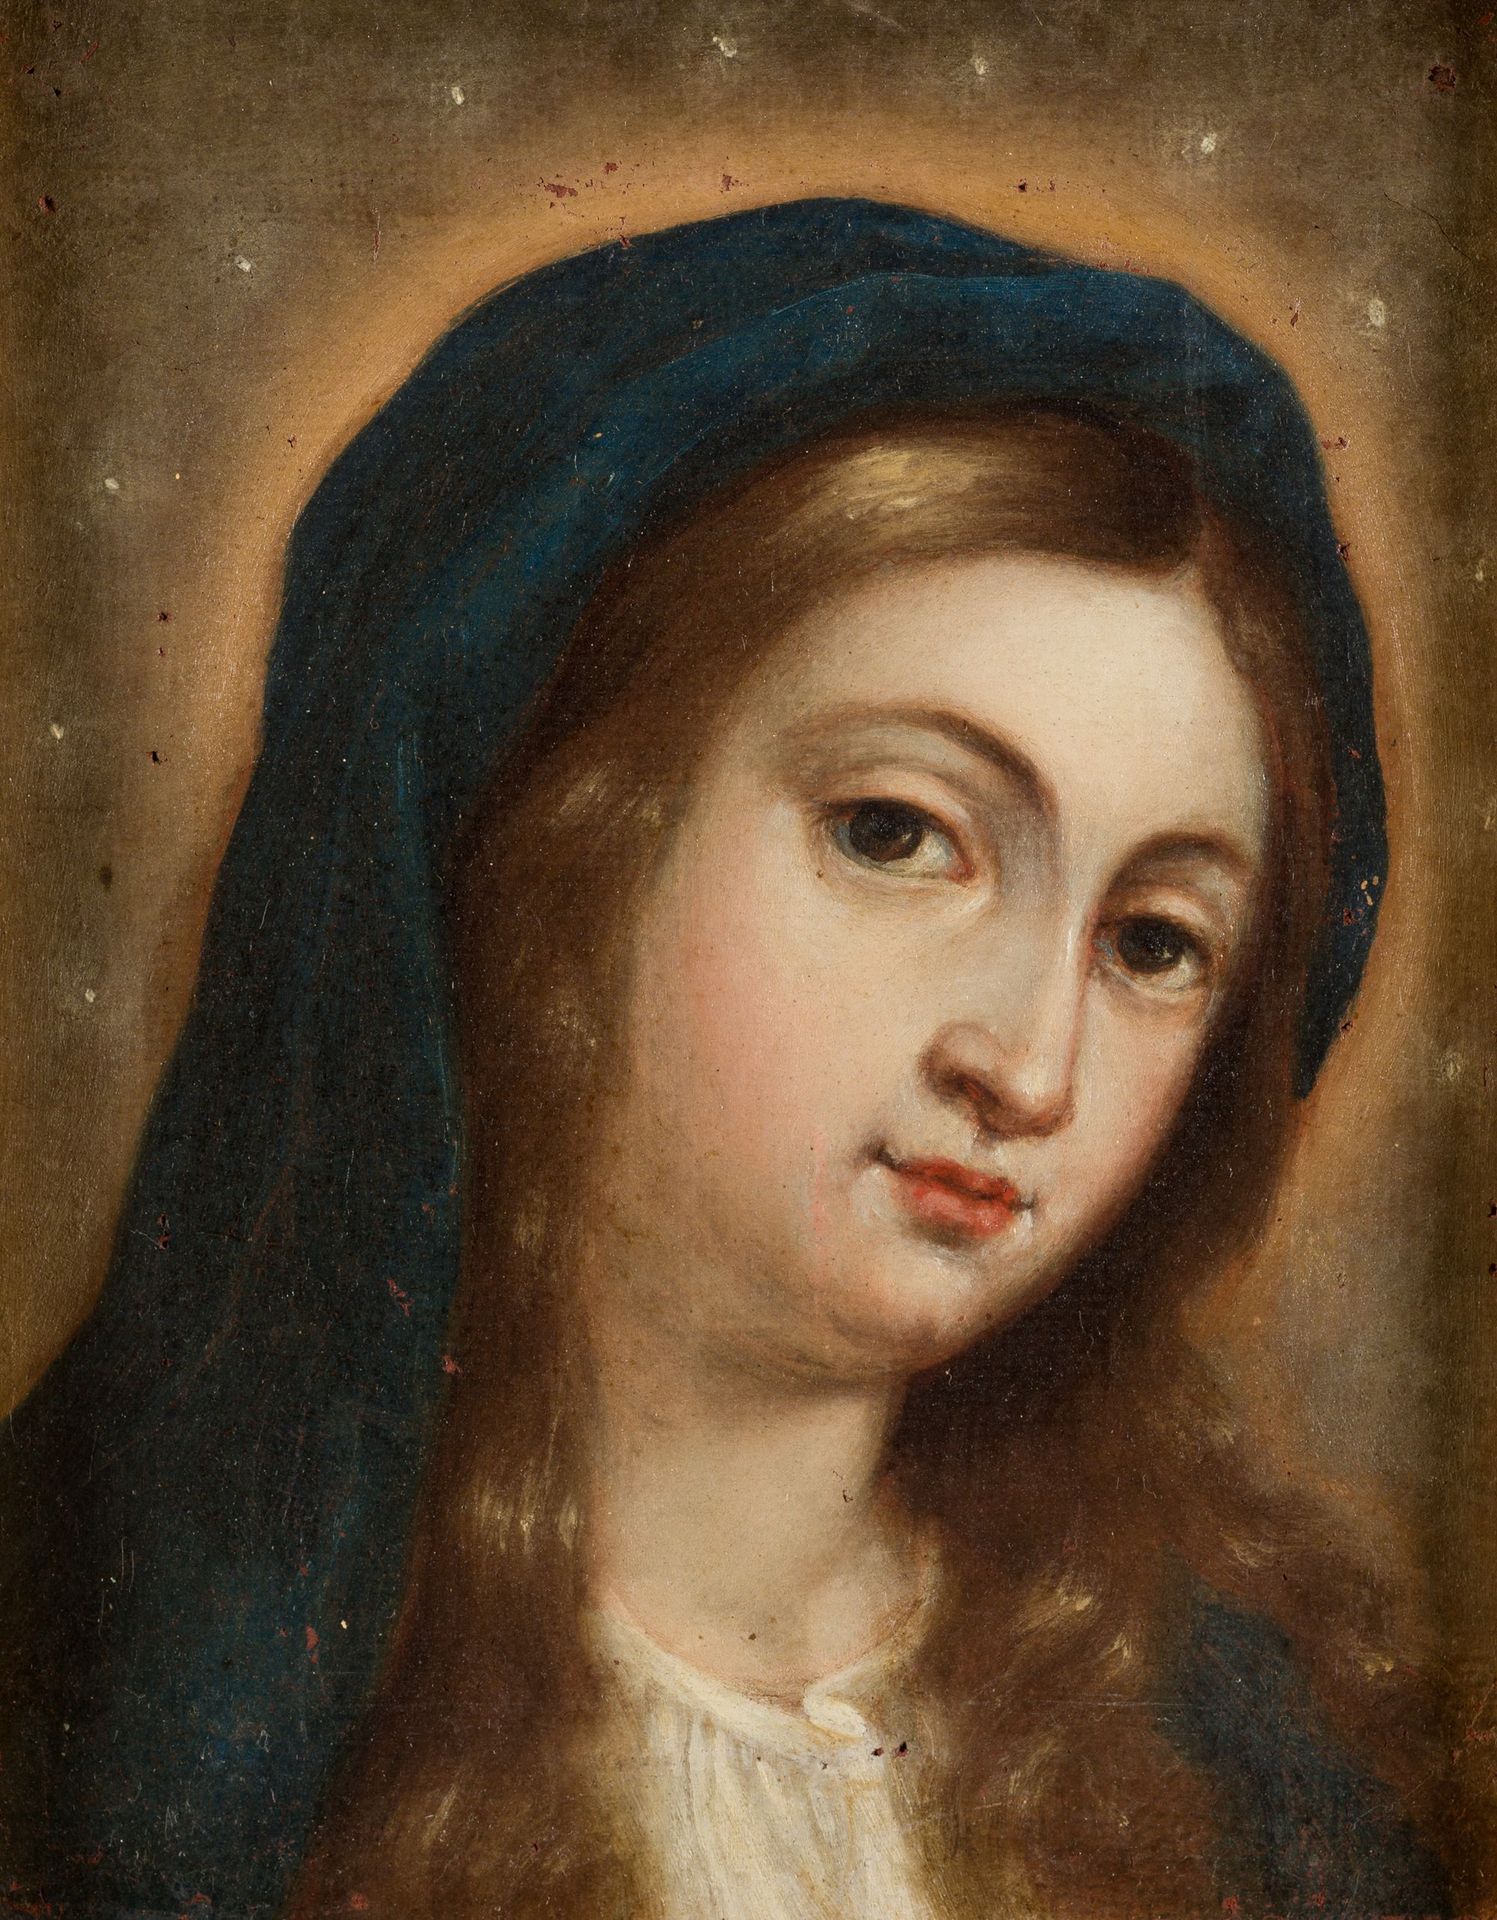 SPANISH SCHOOL (C. 18th / .) "Mary Immaculate" Huile sur toile. 24 x 19 cm.